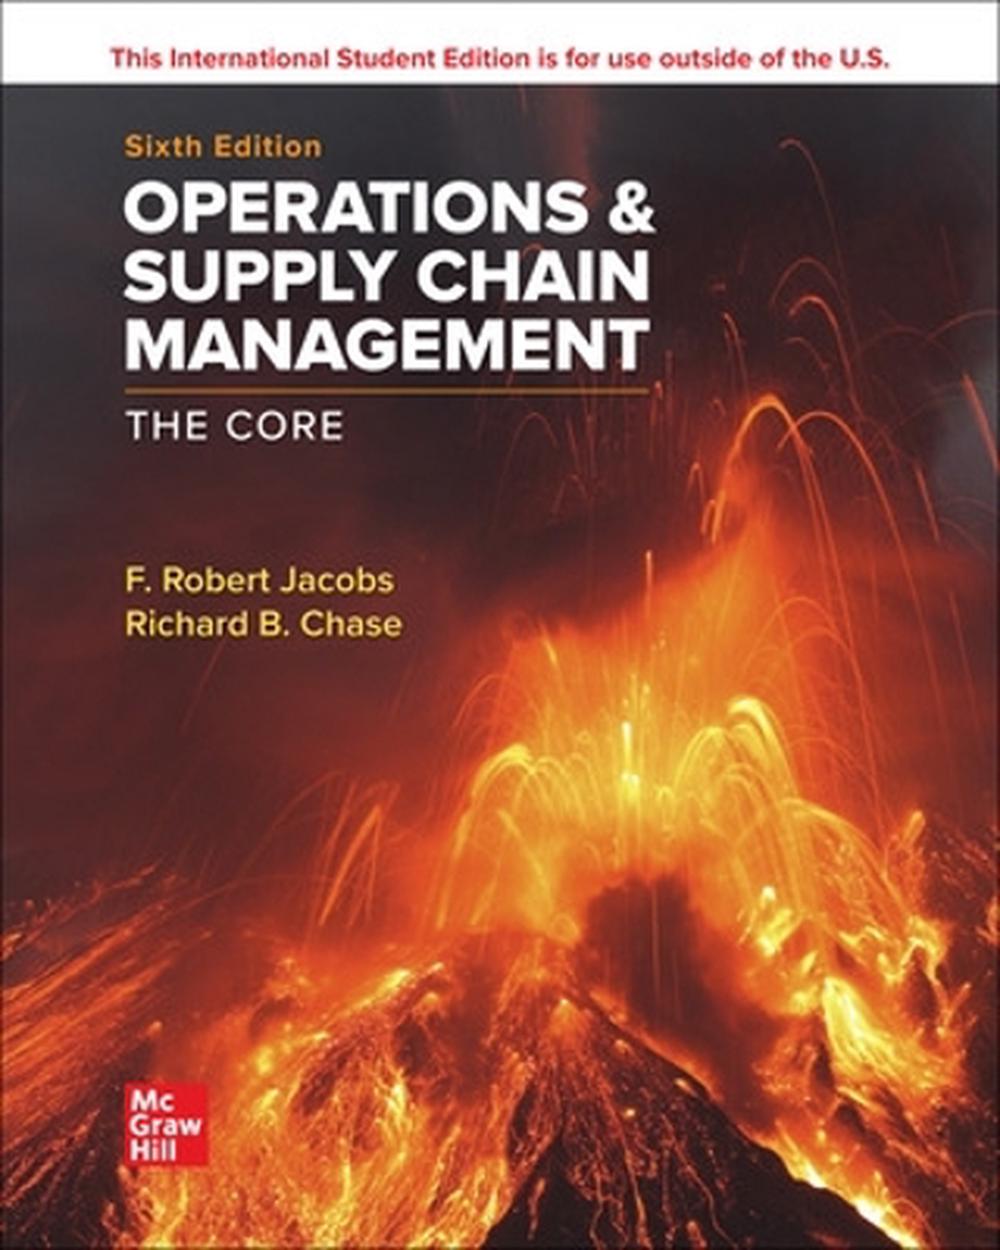 ISE　online　Jacobs,　The　The　Robert　Management:　Supply　Operations　and　9781265076825　at　Core　F.　Chain　Buy　Nile　by　Paperback,